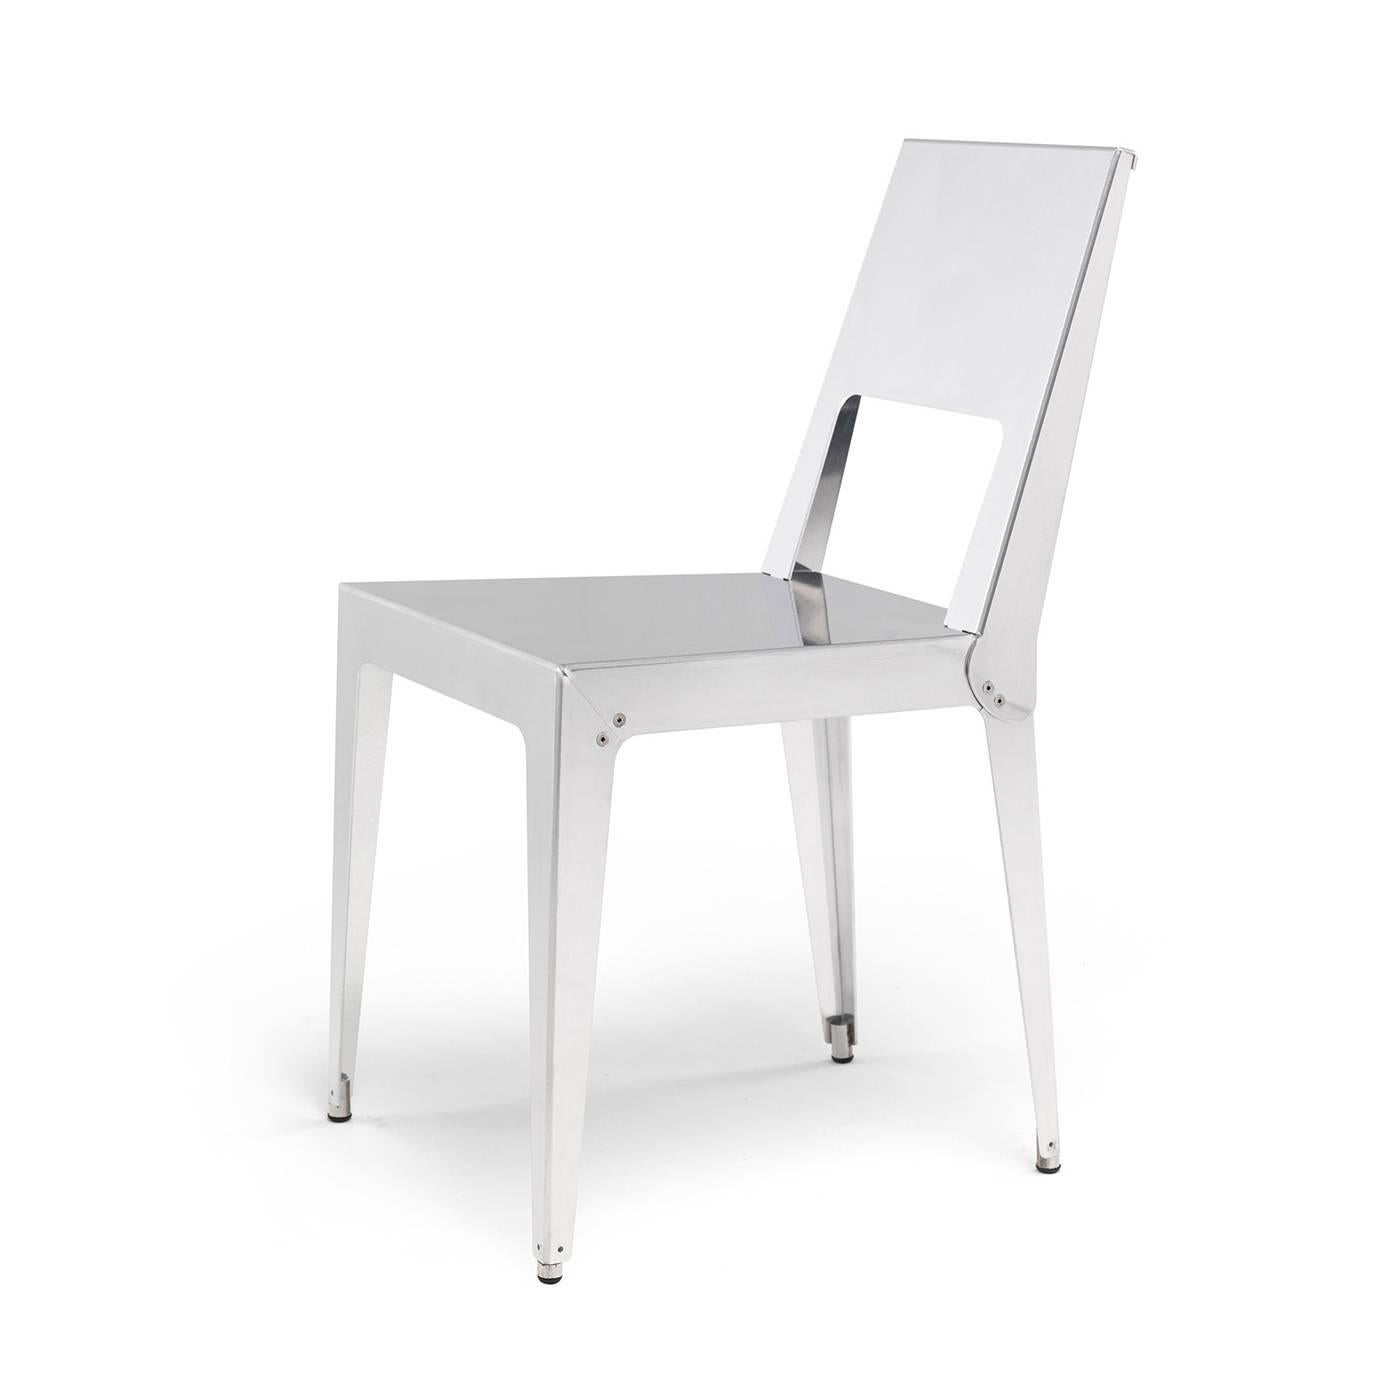 This charming set of two chairs will be a precious addition to a contemporary and modern home. Reinterpreting the simple lines of a Minimalist chair, its body is created by mechanically joining two folded sheets of aluminium without any welding. The